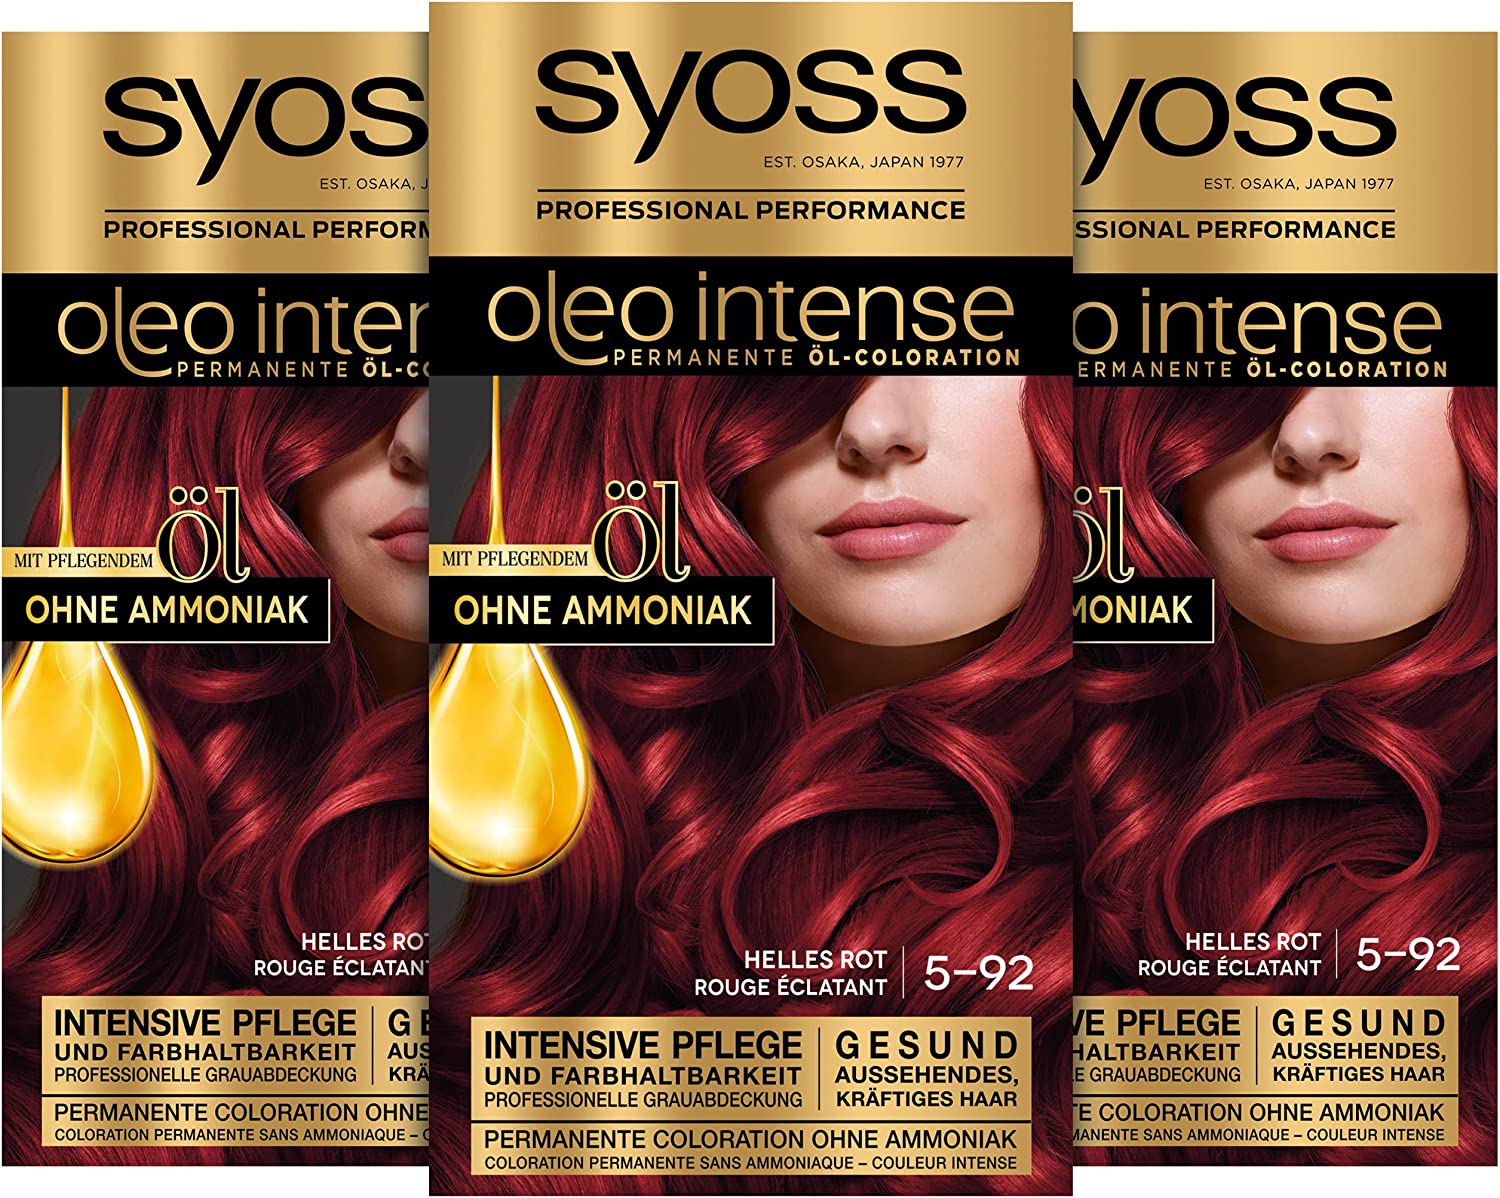 Syoss Oleo Intense Oil Colouration 5-92 Bright Red (115ml) Permanent Hair Colour with Nourishing Oil Ammonia Free